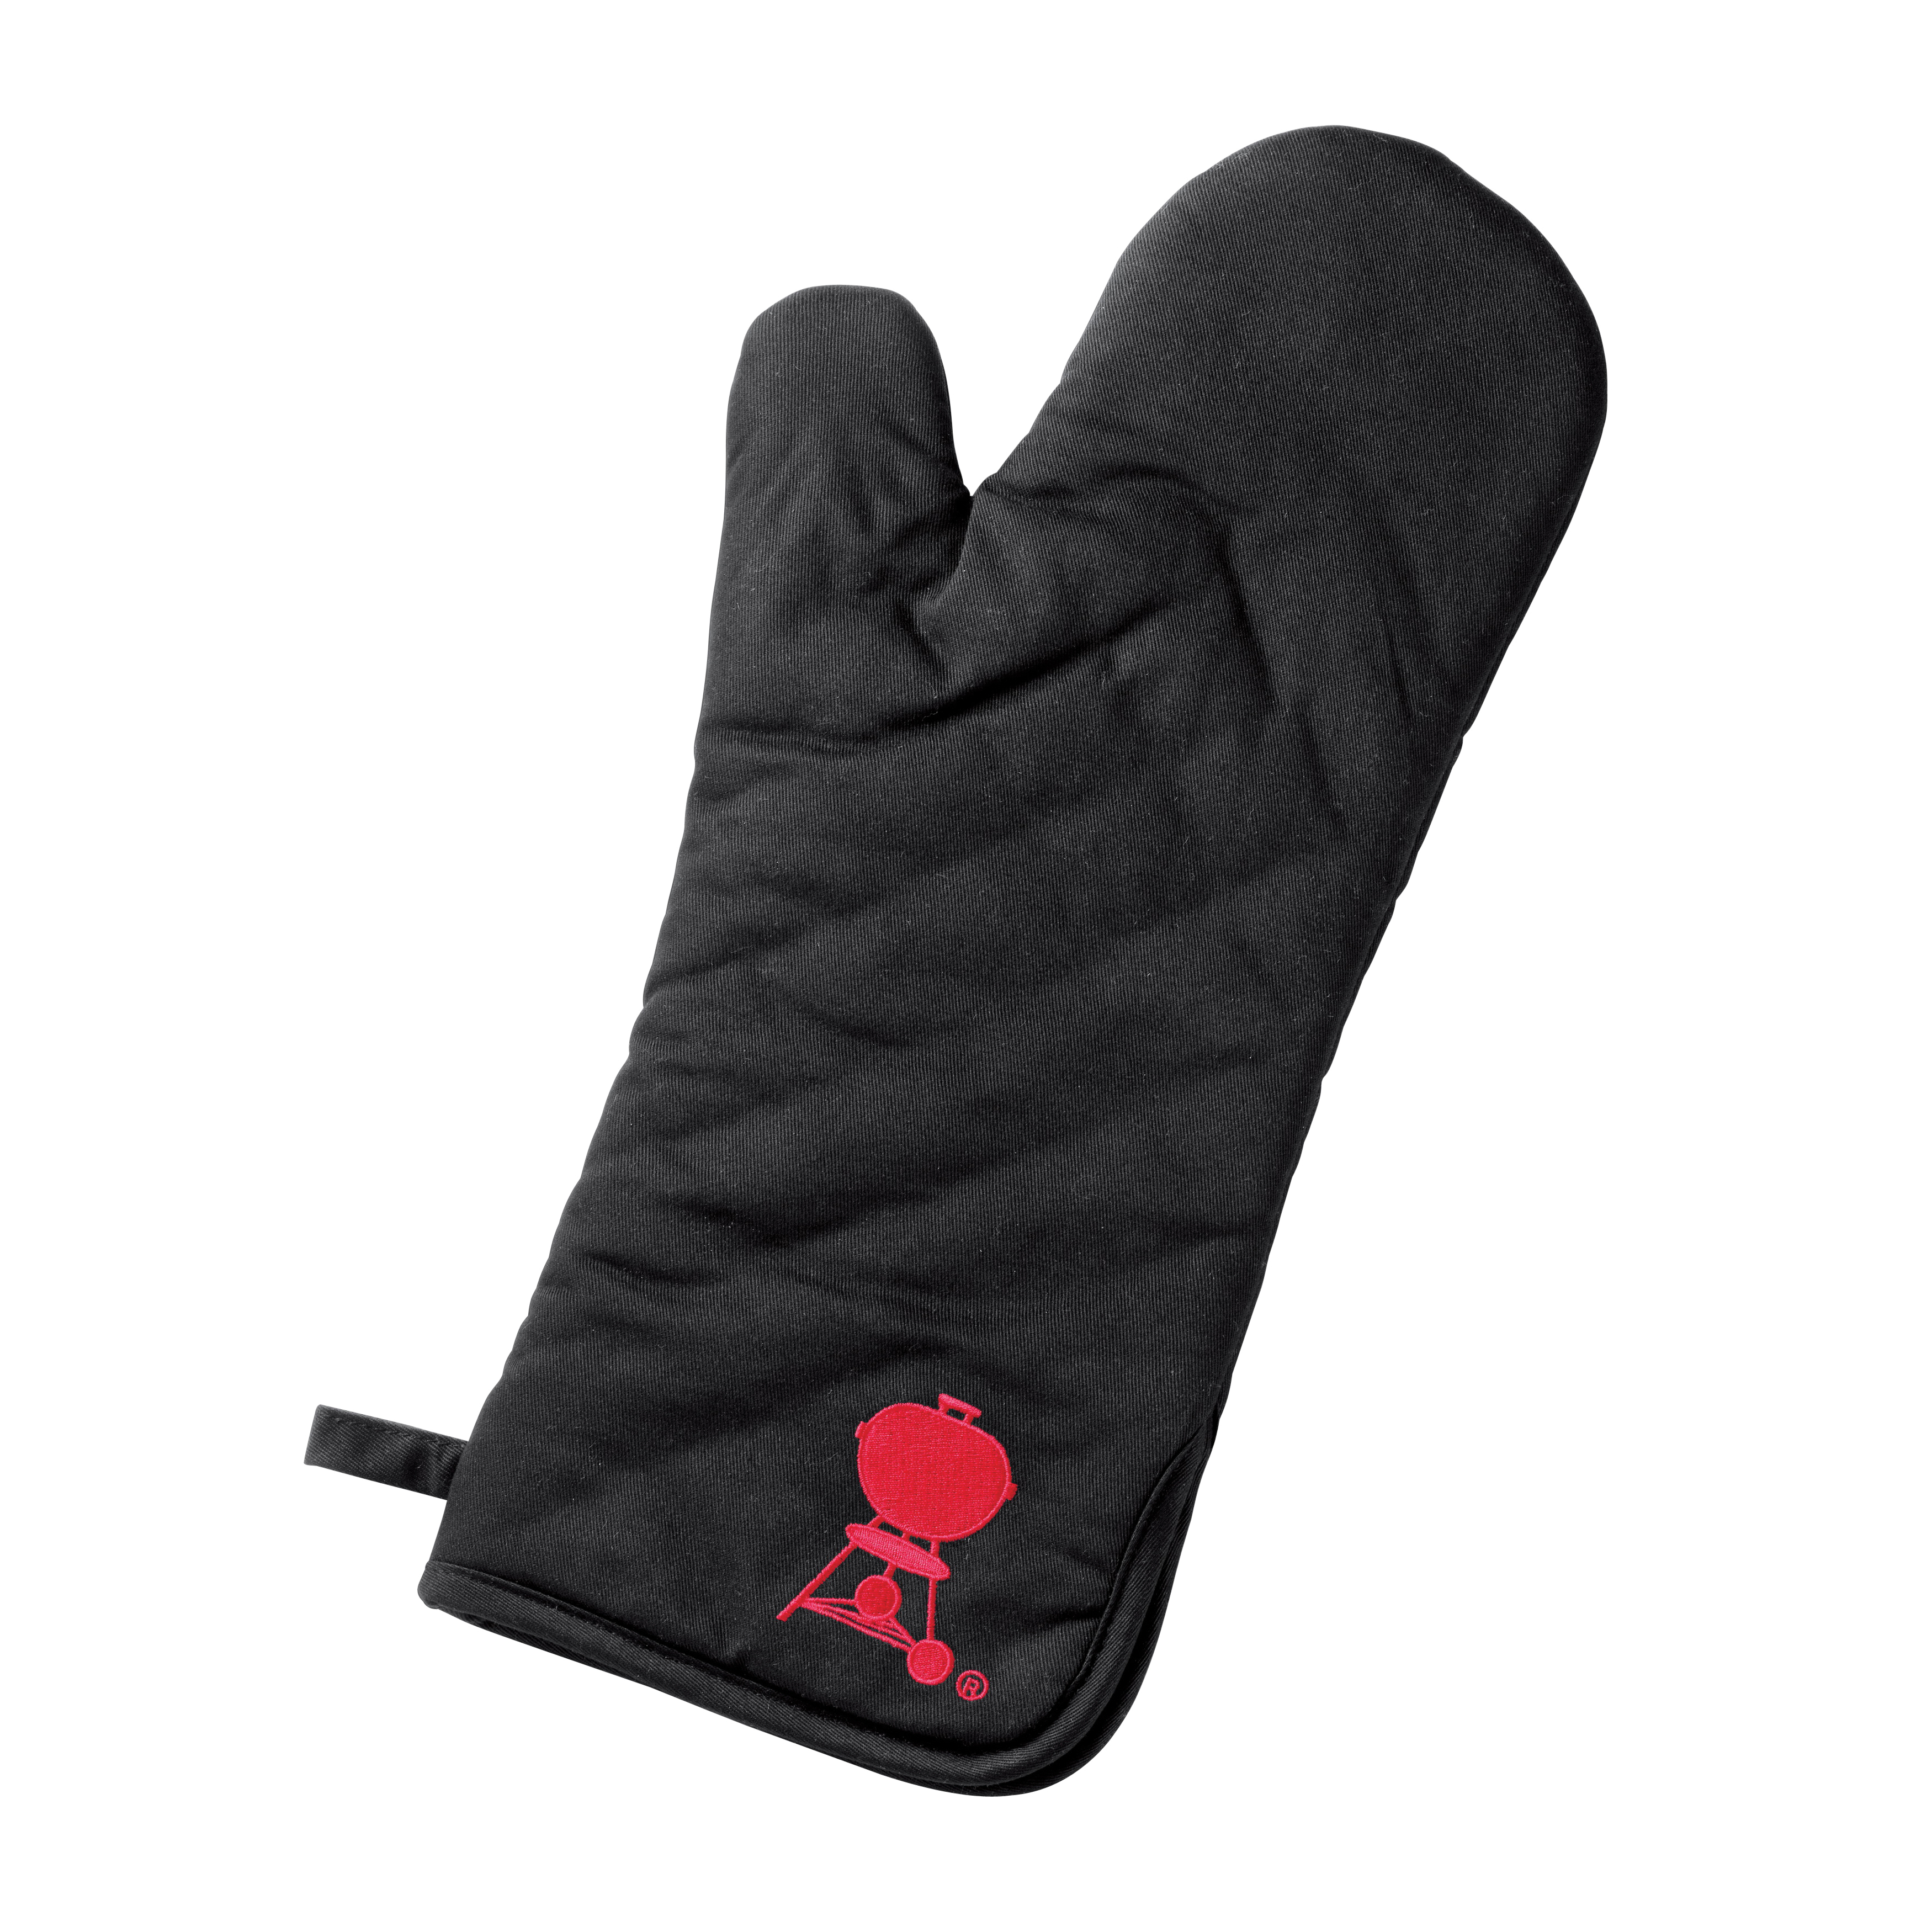 6532 Barbecue Mitt, One-Size, Foldable Cuff, Cotton, Black/Red